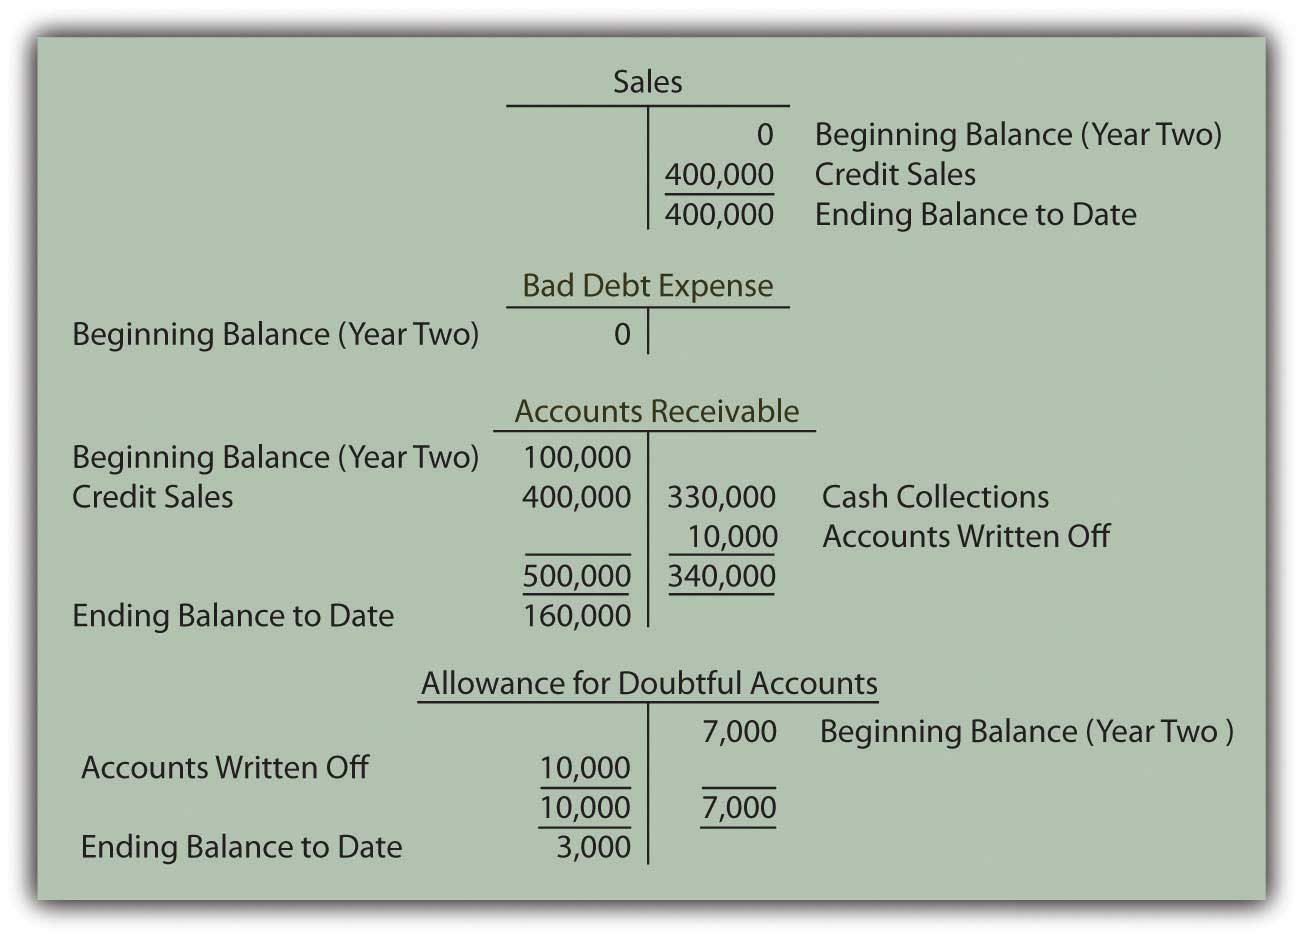 Where To Find Net Credit Sales On Financial Statements